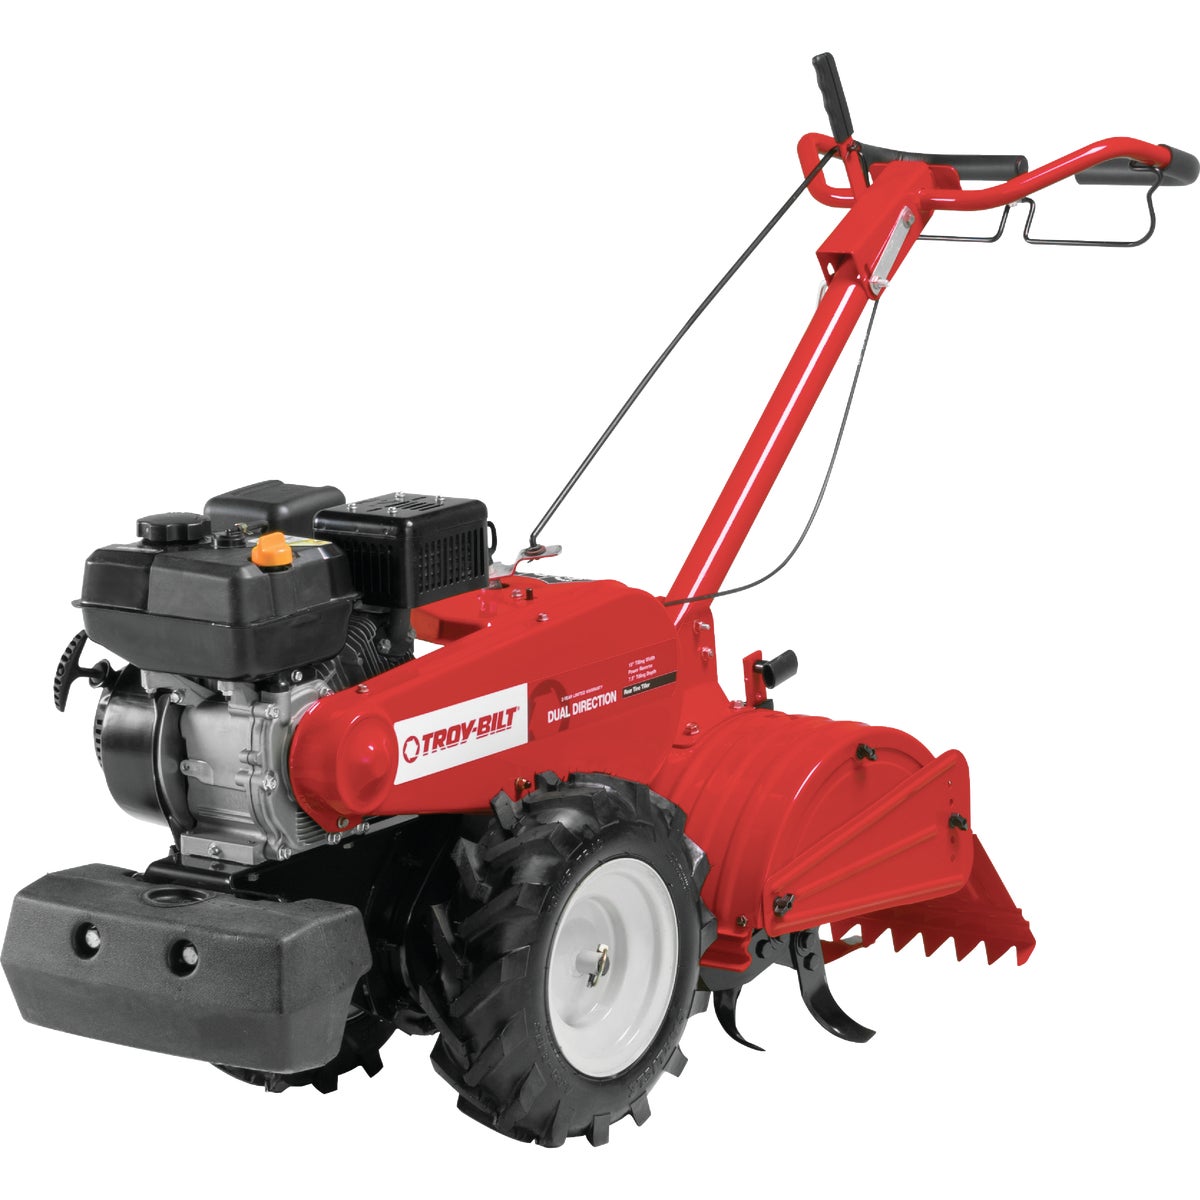 Item 756541, Powered by a 208 cc Troy-Bilt OHV engine. 16 In.